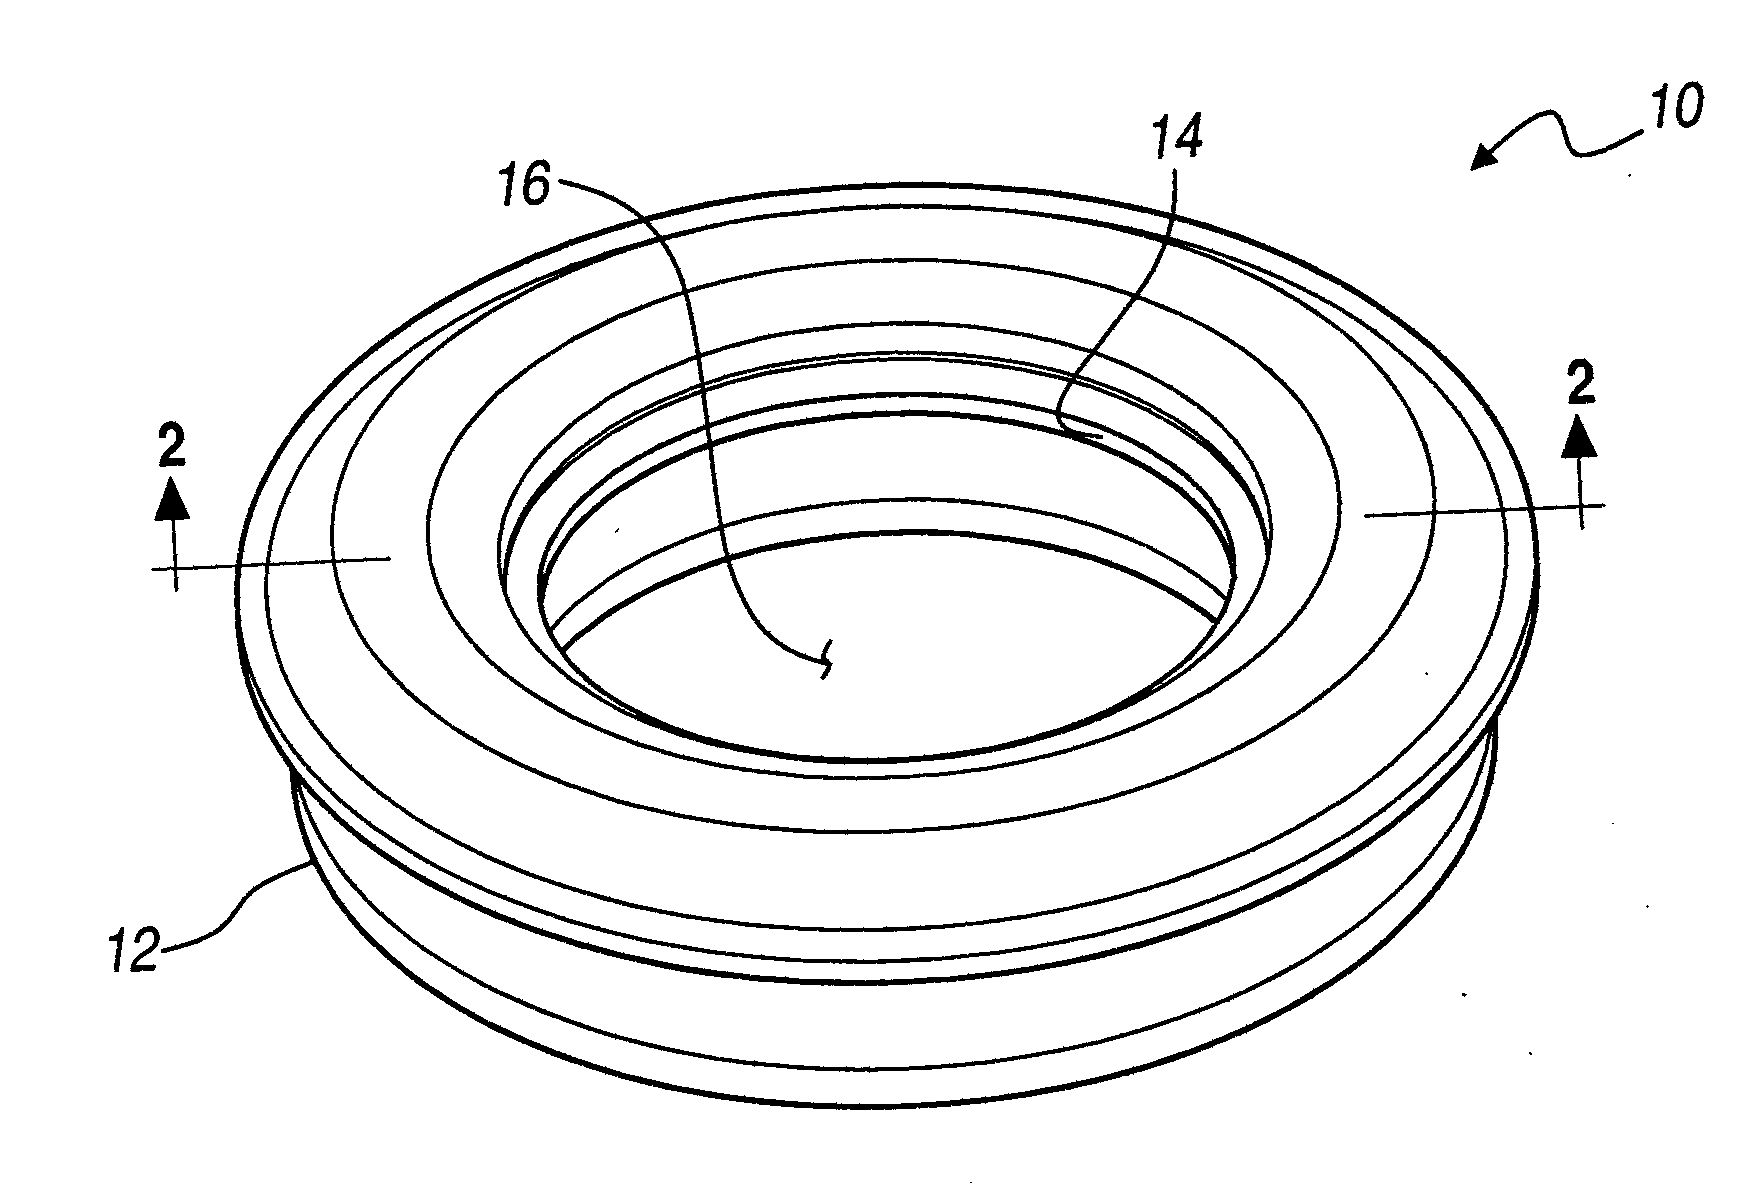 Method and apparatus for preparing a beverage